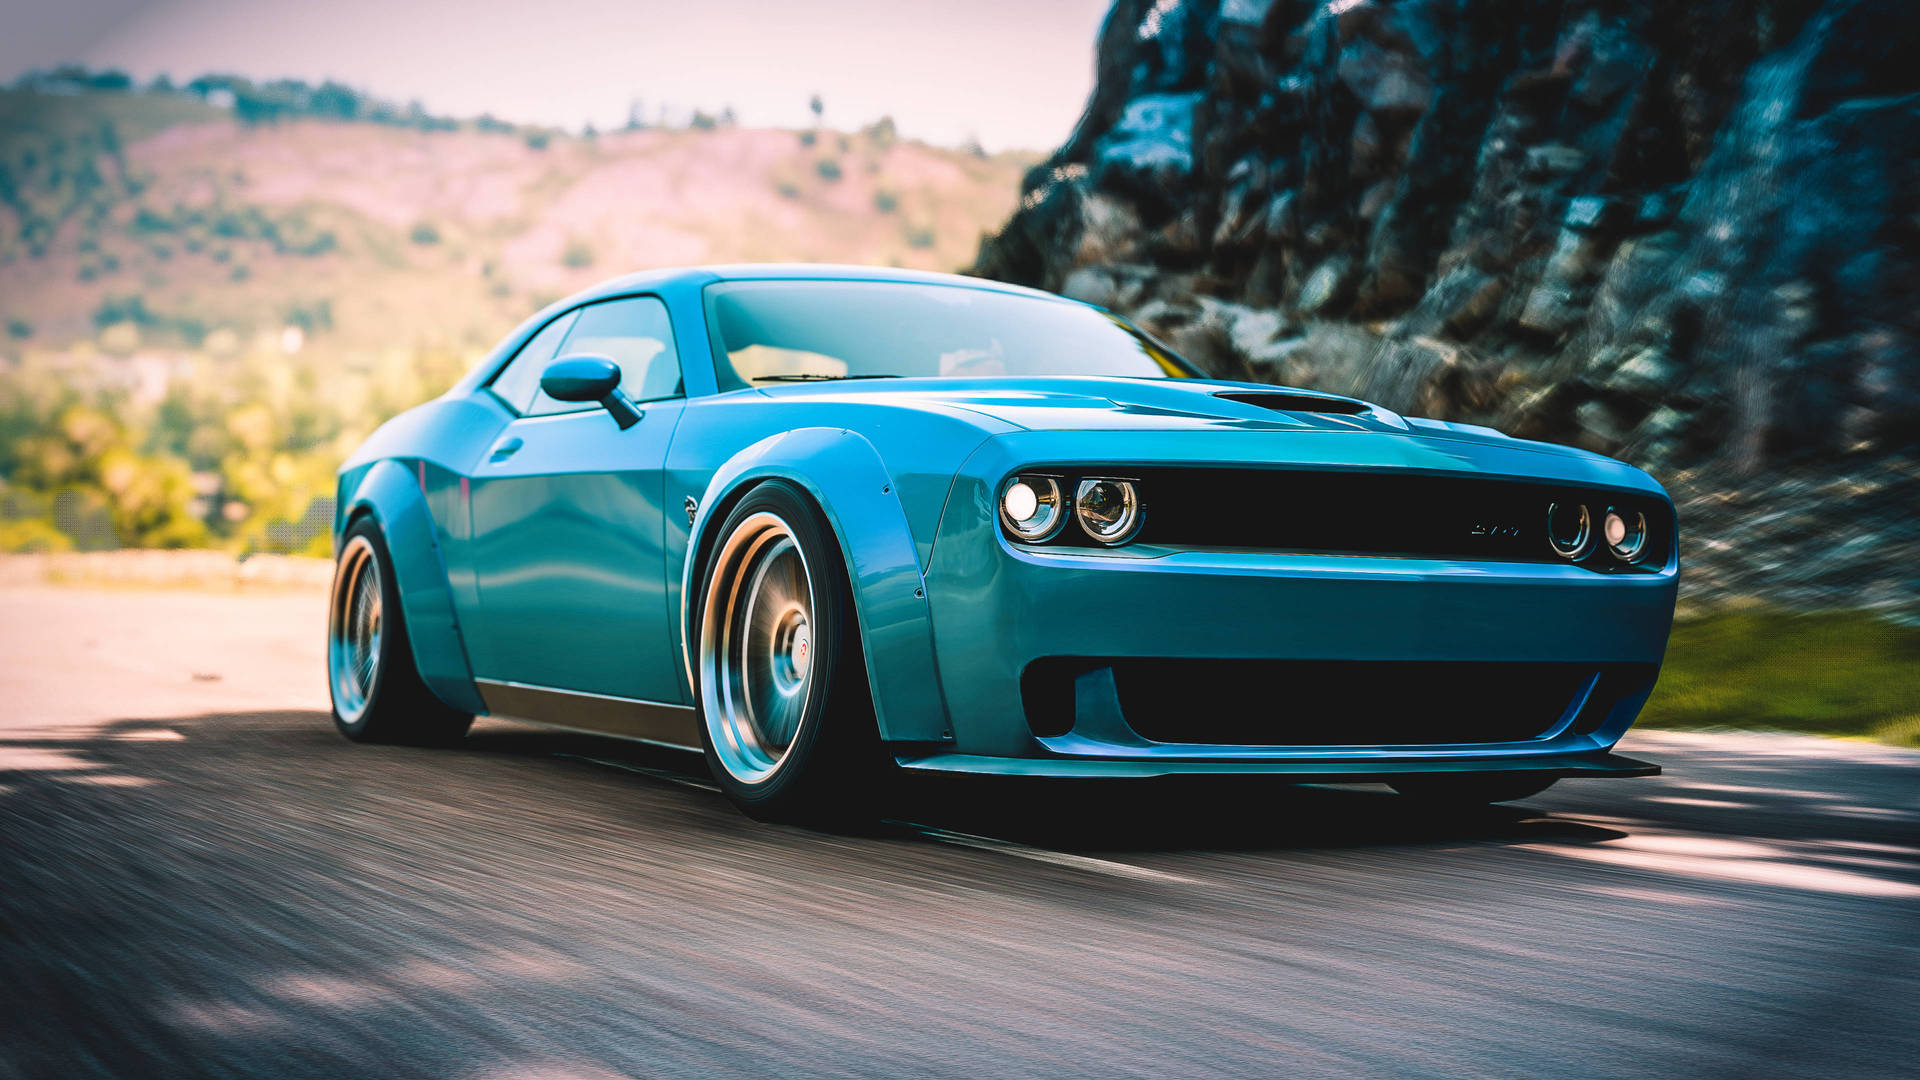 Caption: Forza 4: Dodge Challenger Roaring On The Track Background